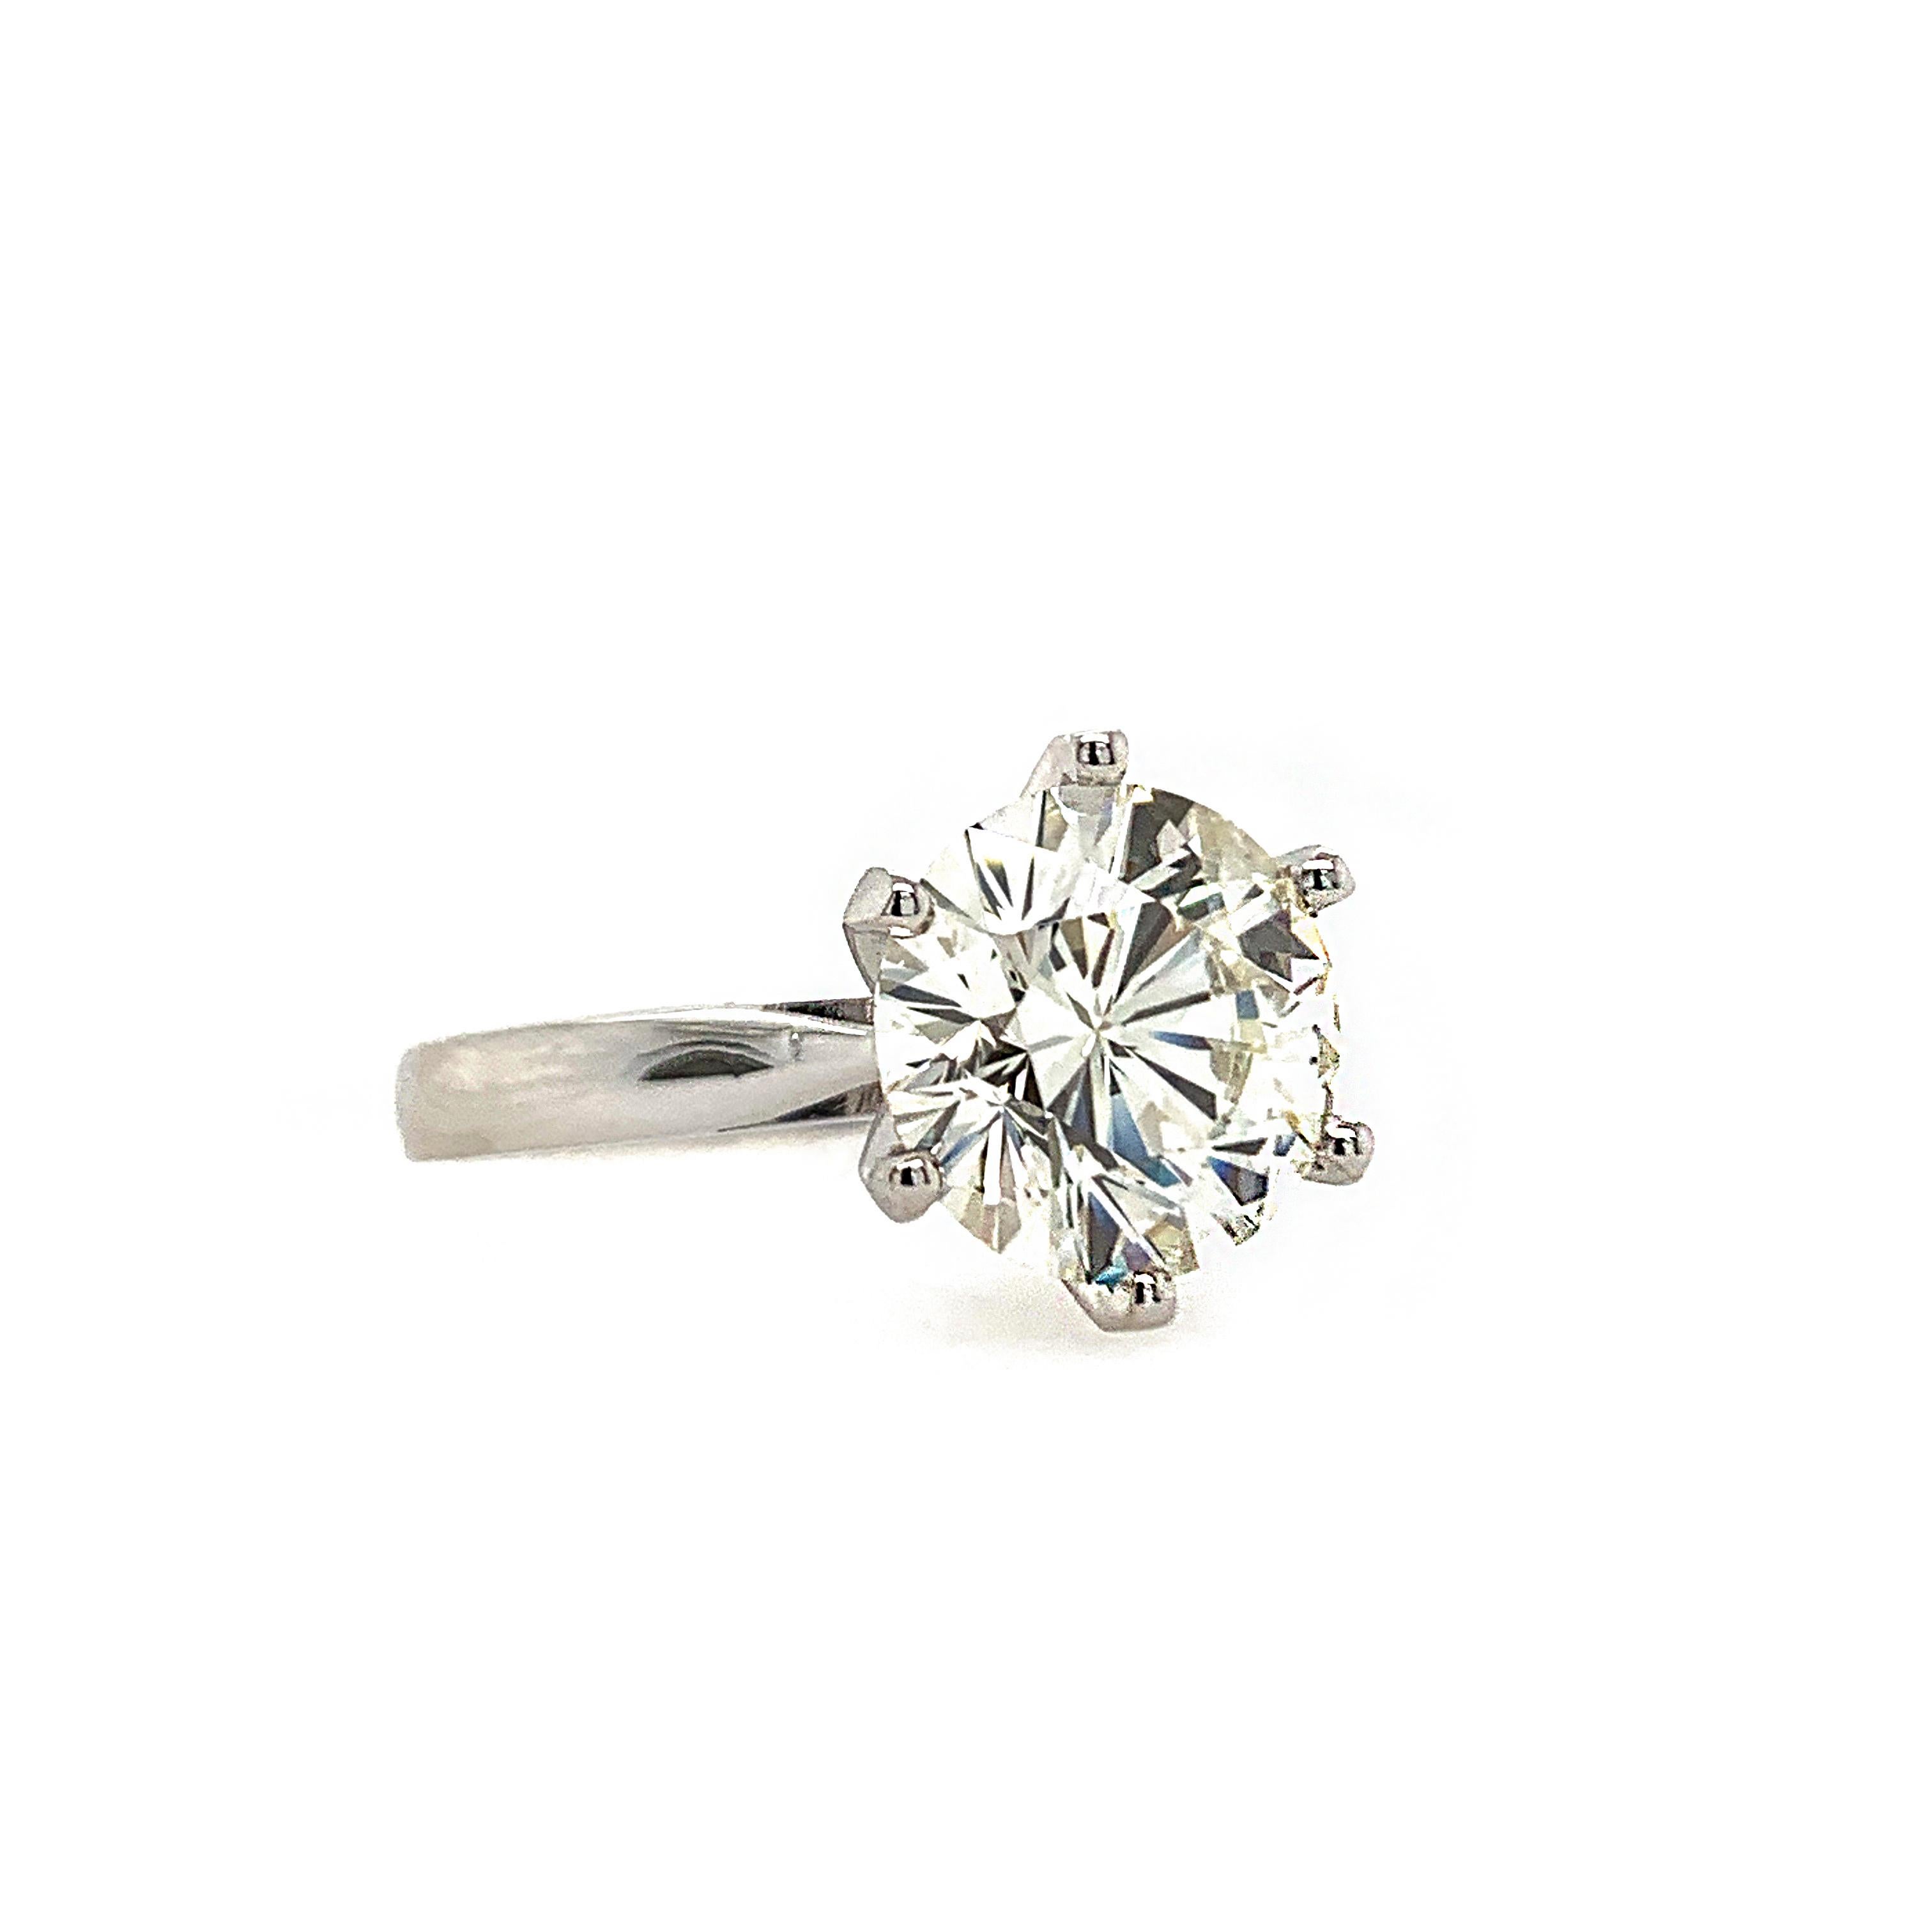 This breathtaking solitaire ring flaunts a 3.53 carats round brilliant natural white diamond set in a 6 prong setting.

Set in 14K white gold.

Center stone: Natural white diamond - 3.53 carats, color H, clarity SI1 (comes with EGL